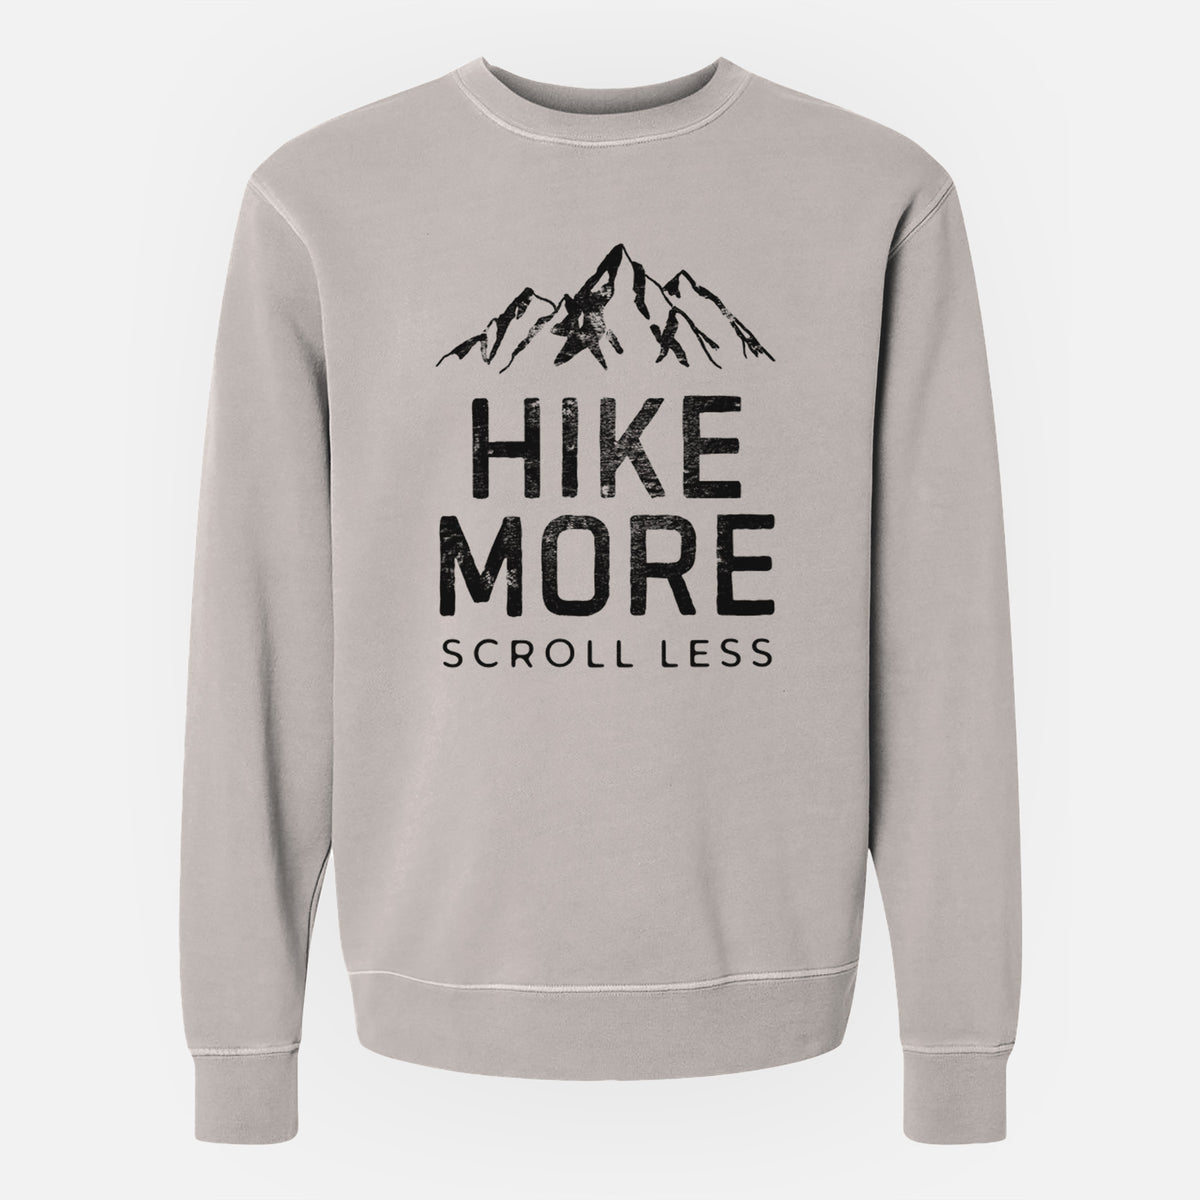 Hike More - Scroll Less - Unisex Pigment Dyed Crew Sweatshirt